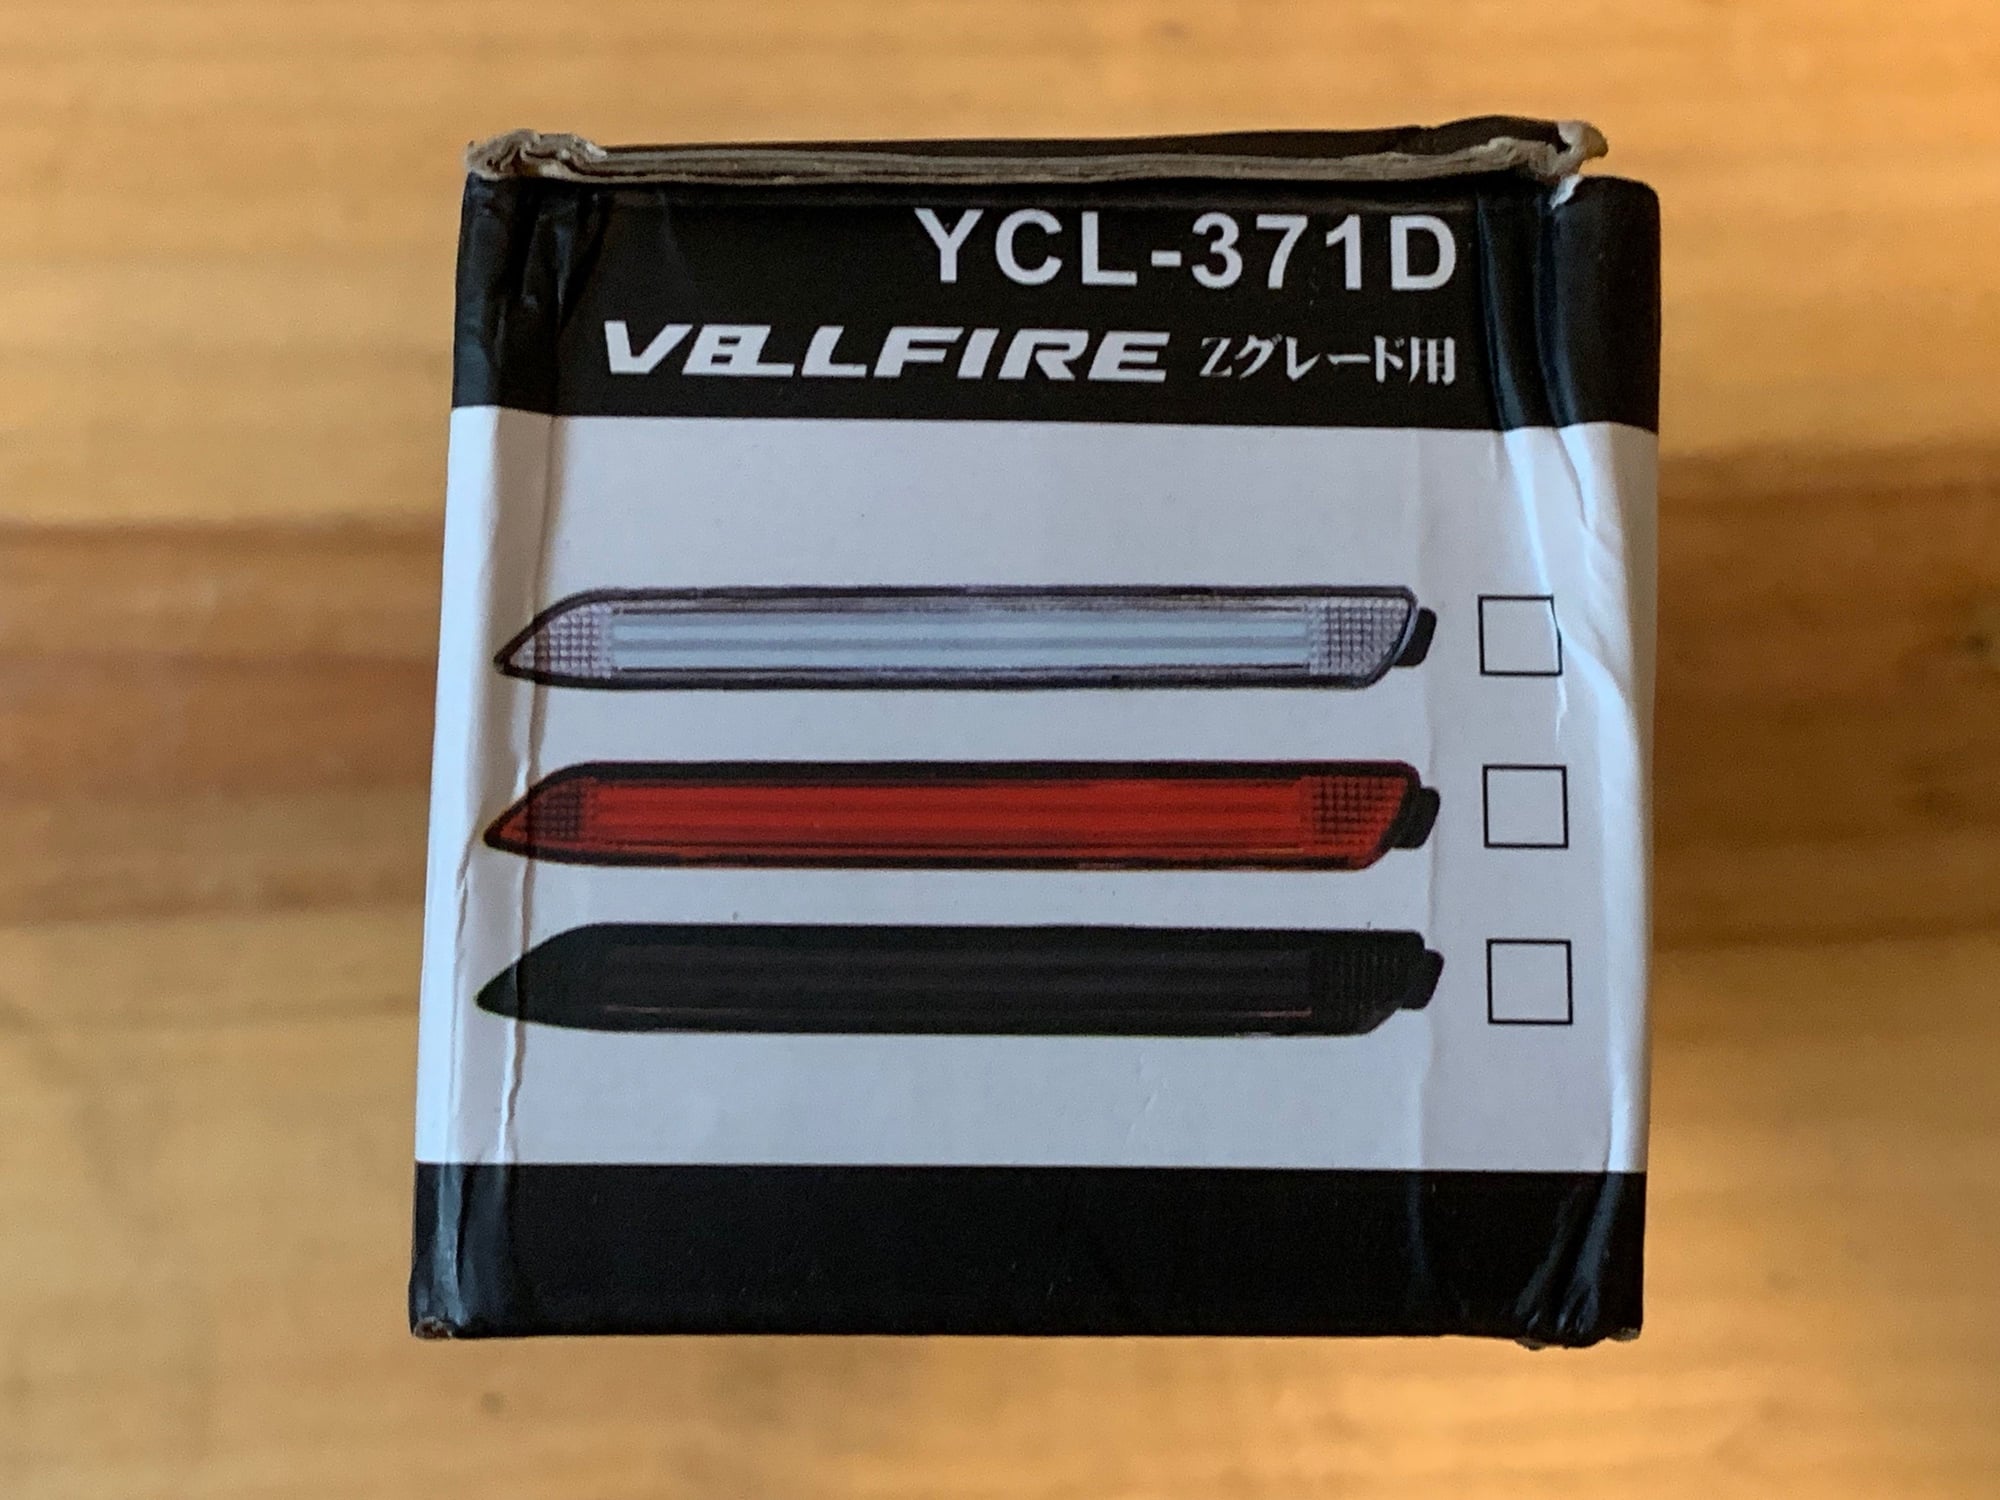 Lights - Vellfire Black Tinted Rear Bumper Brake Lights for RC and RCF, replaces reflectors. - New - 2015 to 2019 Lexus RC F - Denver, CO 80221, United States